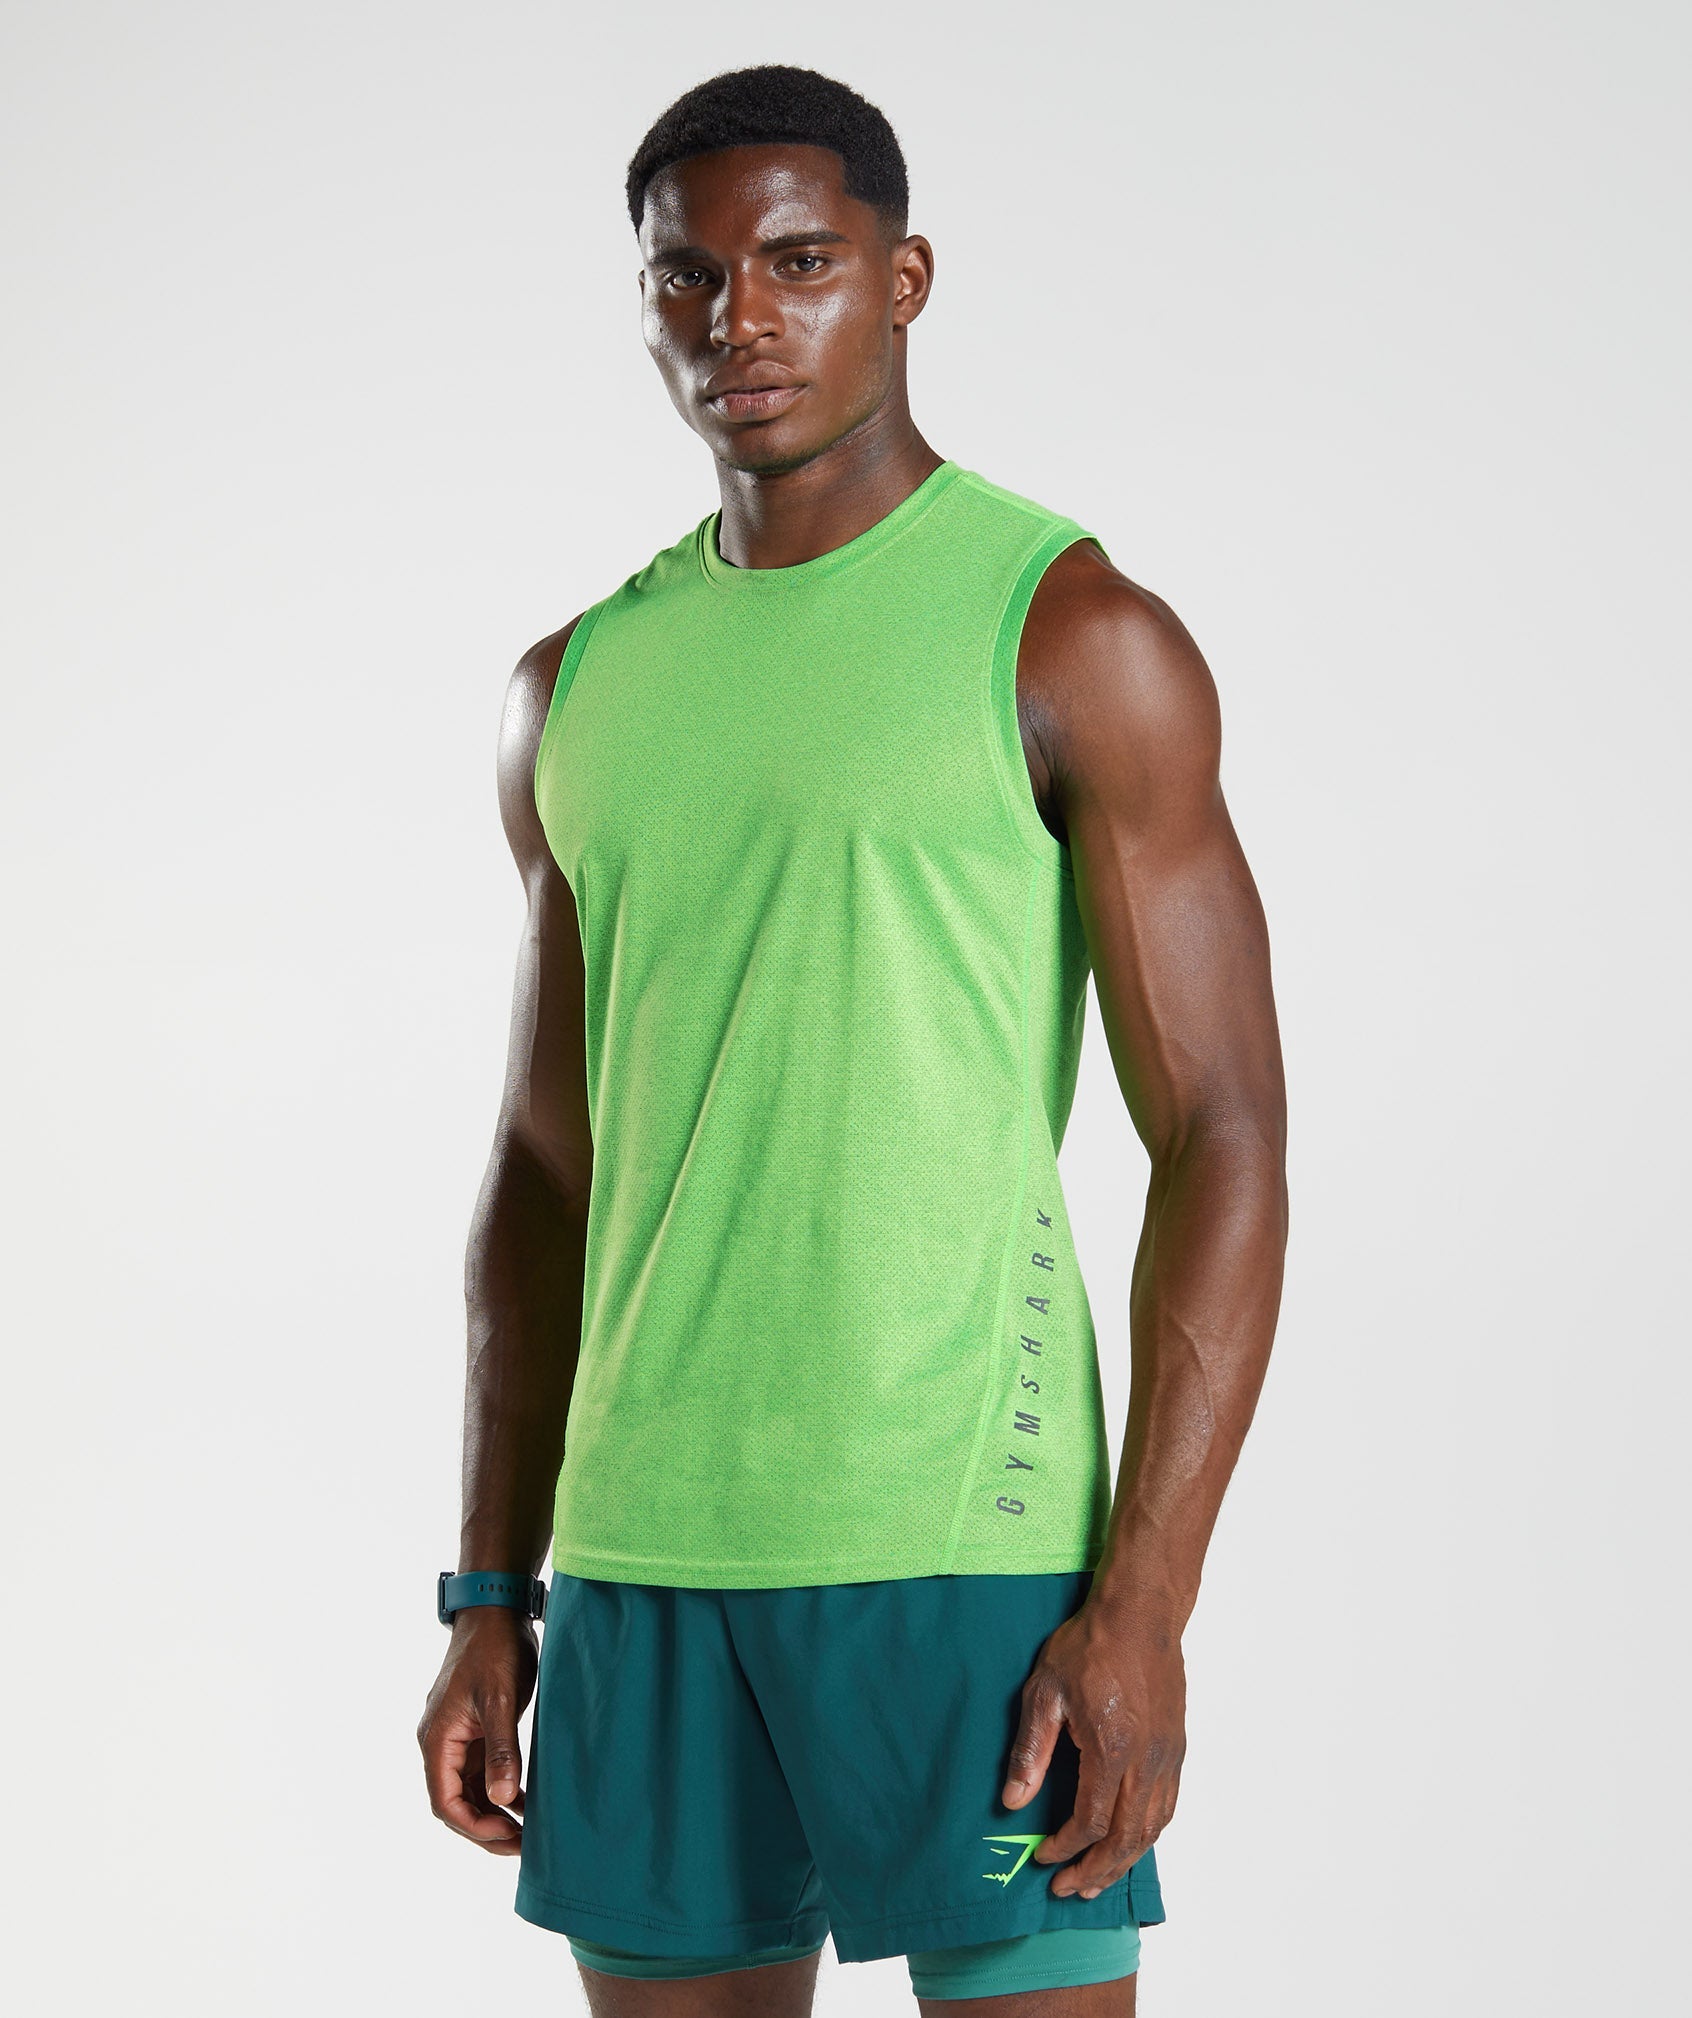 Sport Tank in Fluo Lime/Black Marl - view 1